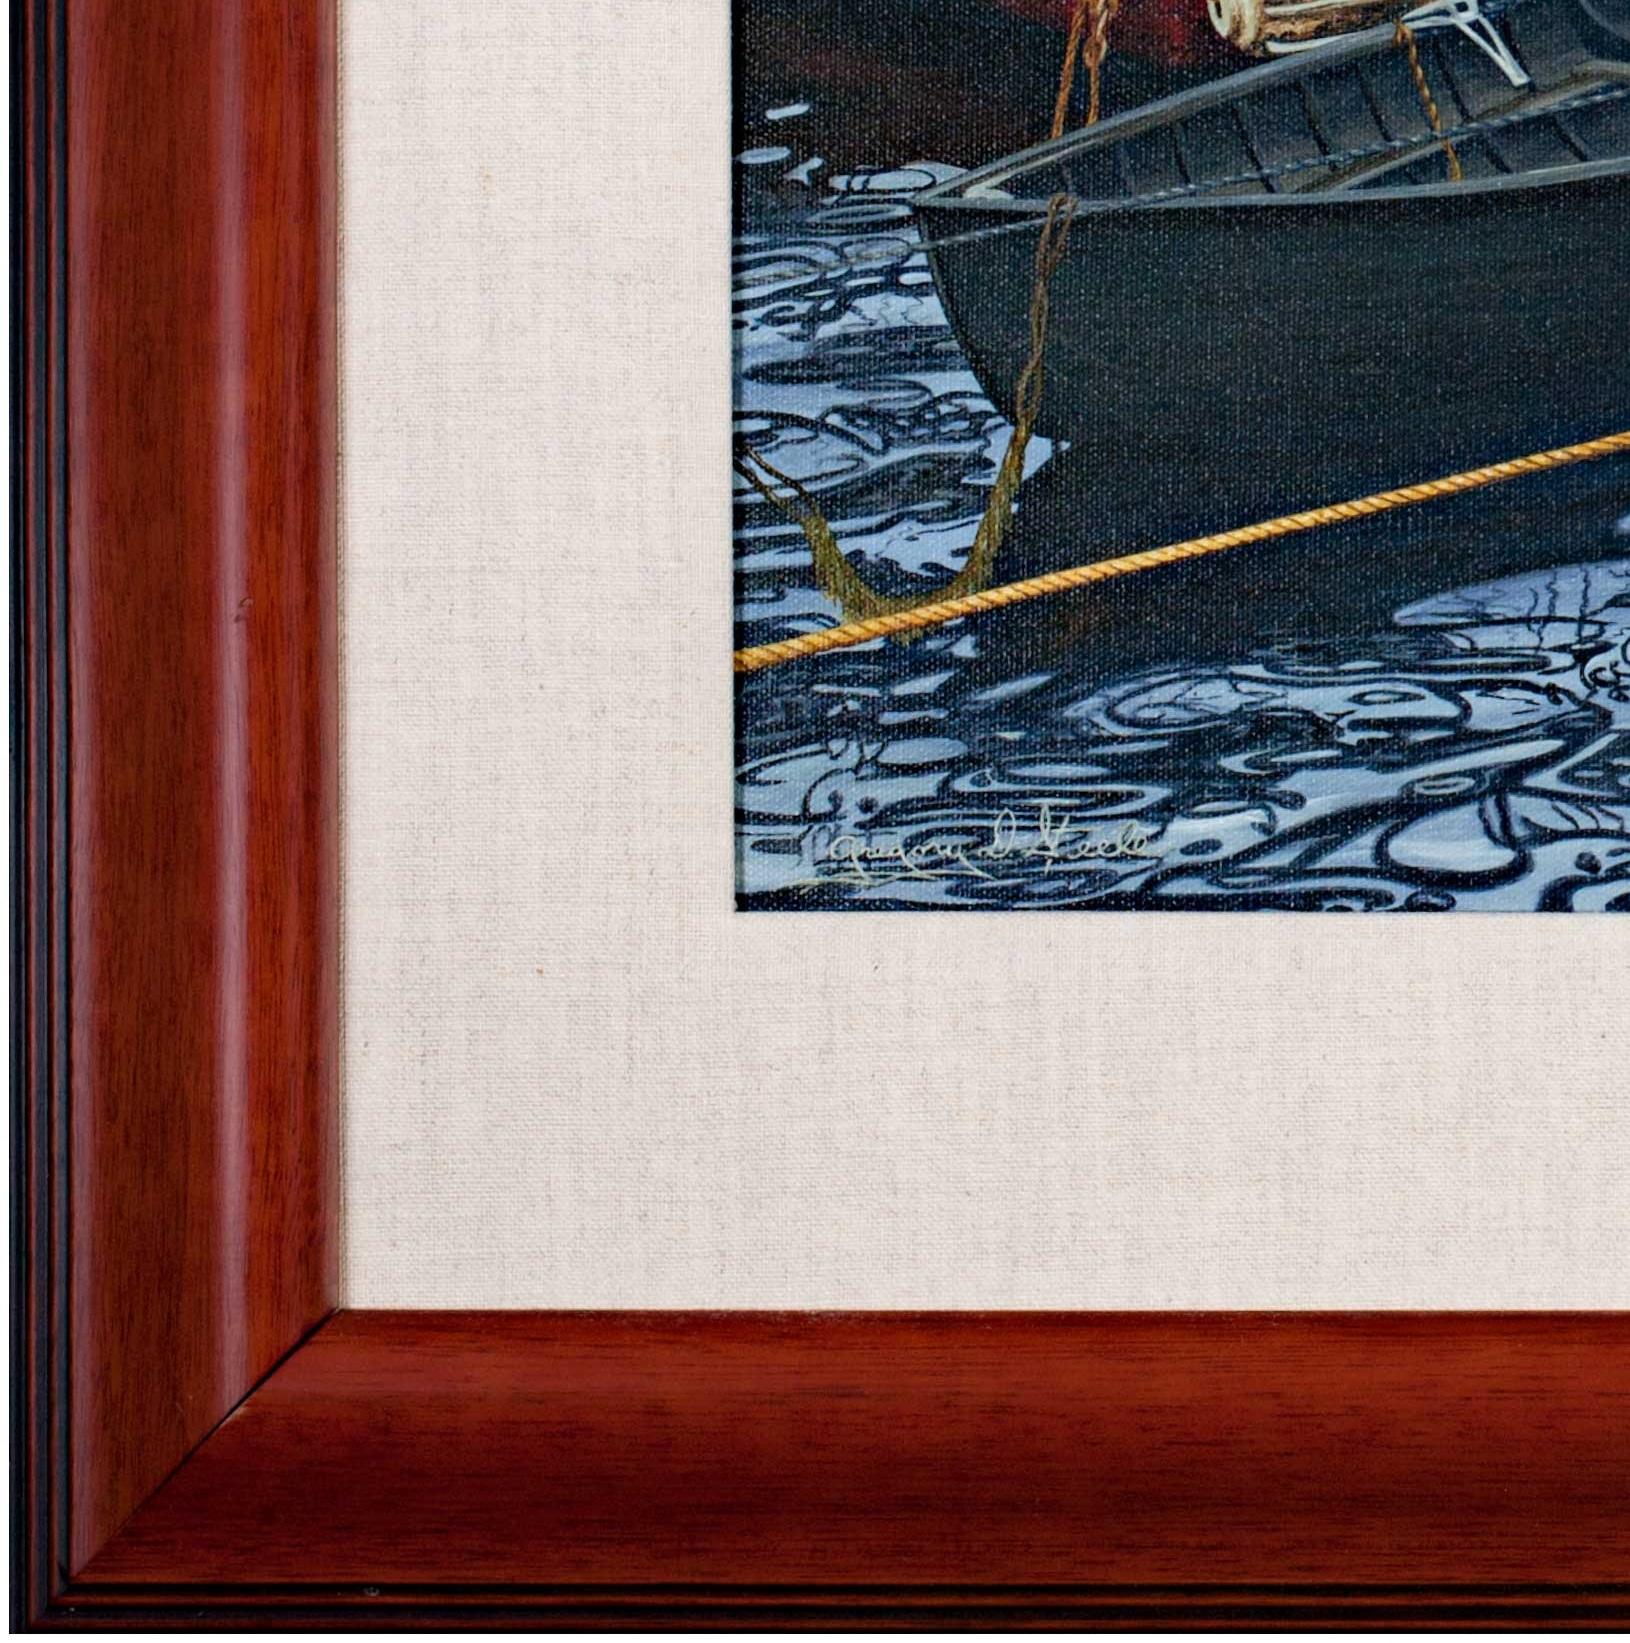 'Boats at Camdon' giclee print on canvas after 1998 oil - Gray Landscape Print by Gregory D. Steele